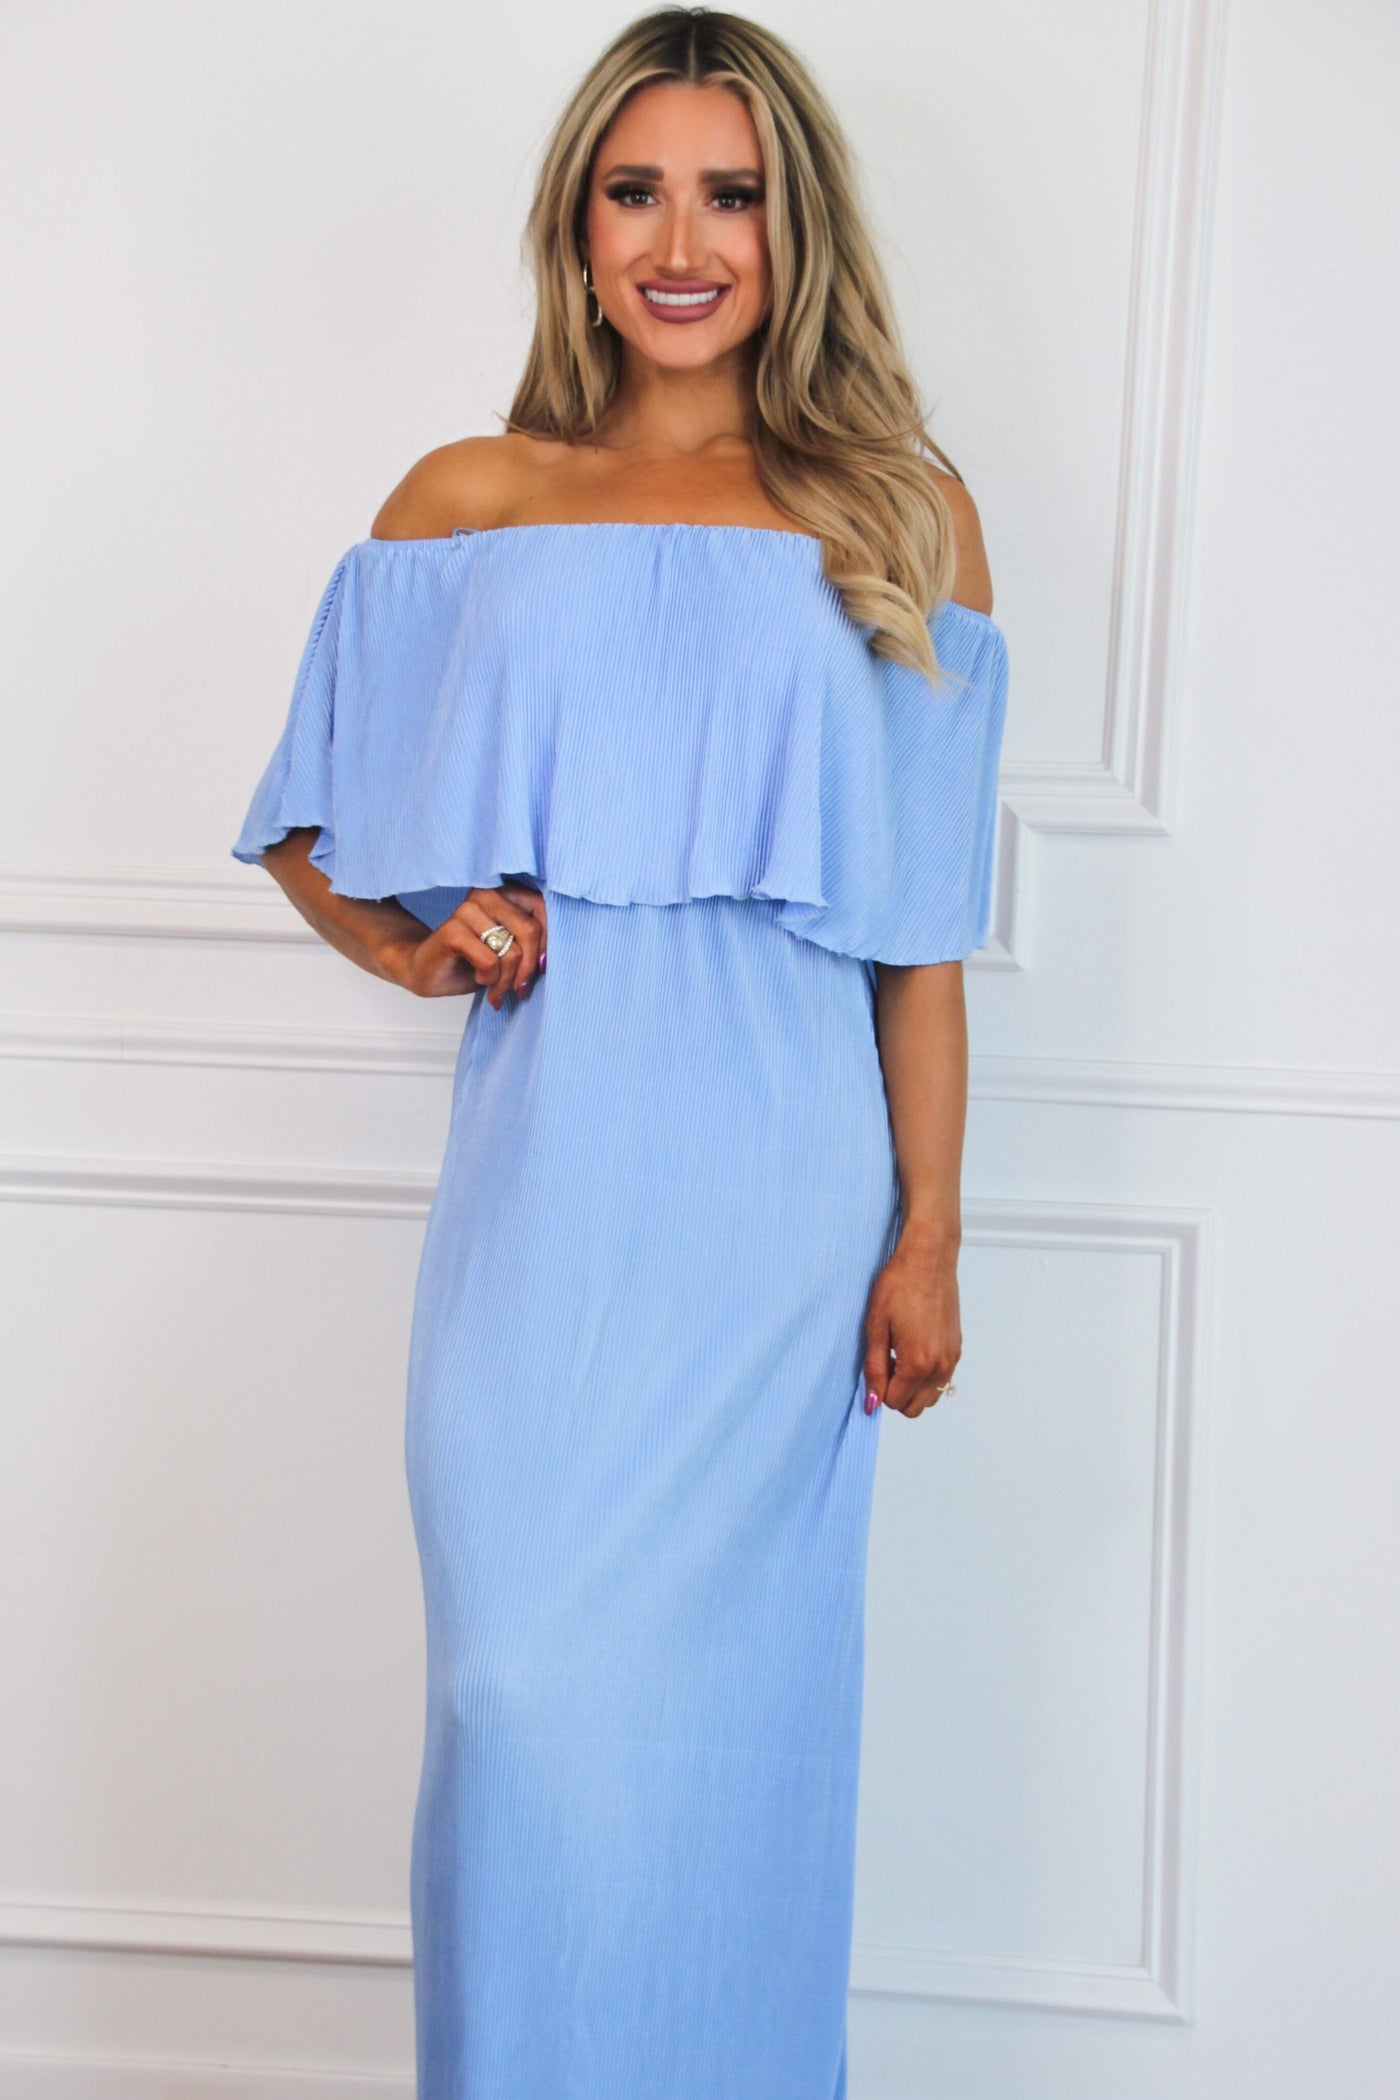 Let It Be Beautiful Pleated Maxi Dress: Periwinkle - Bella and Bloom Boutique